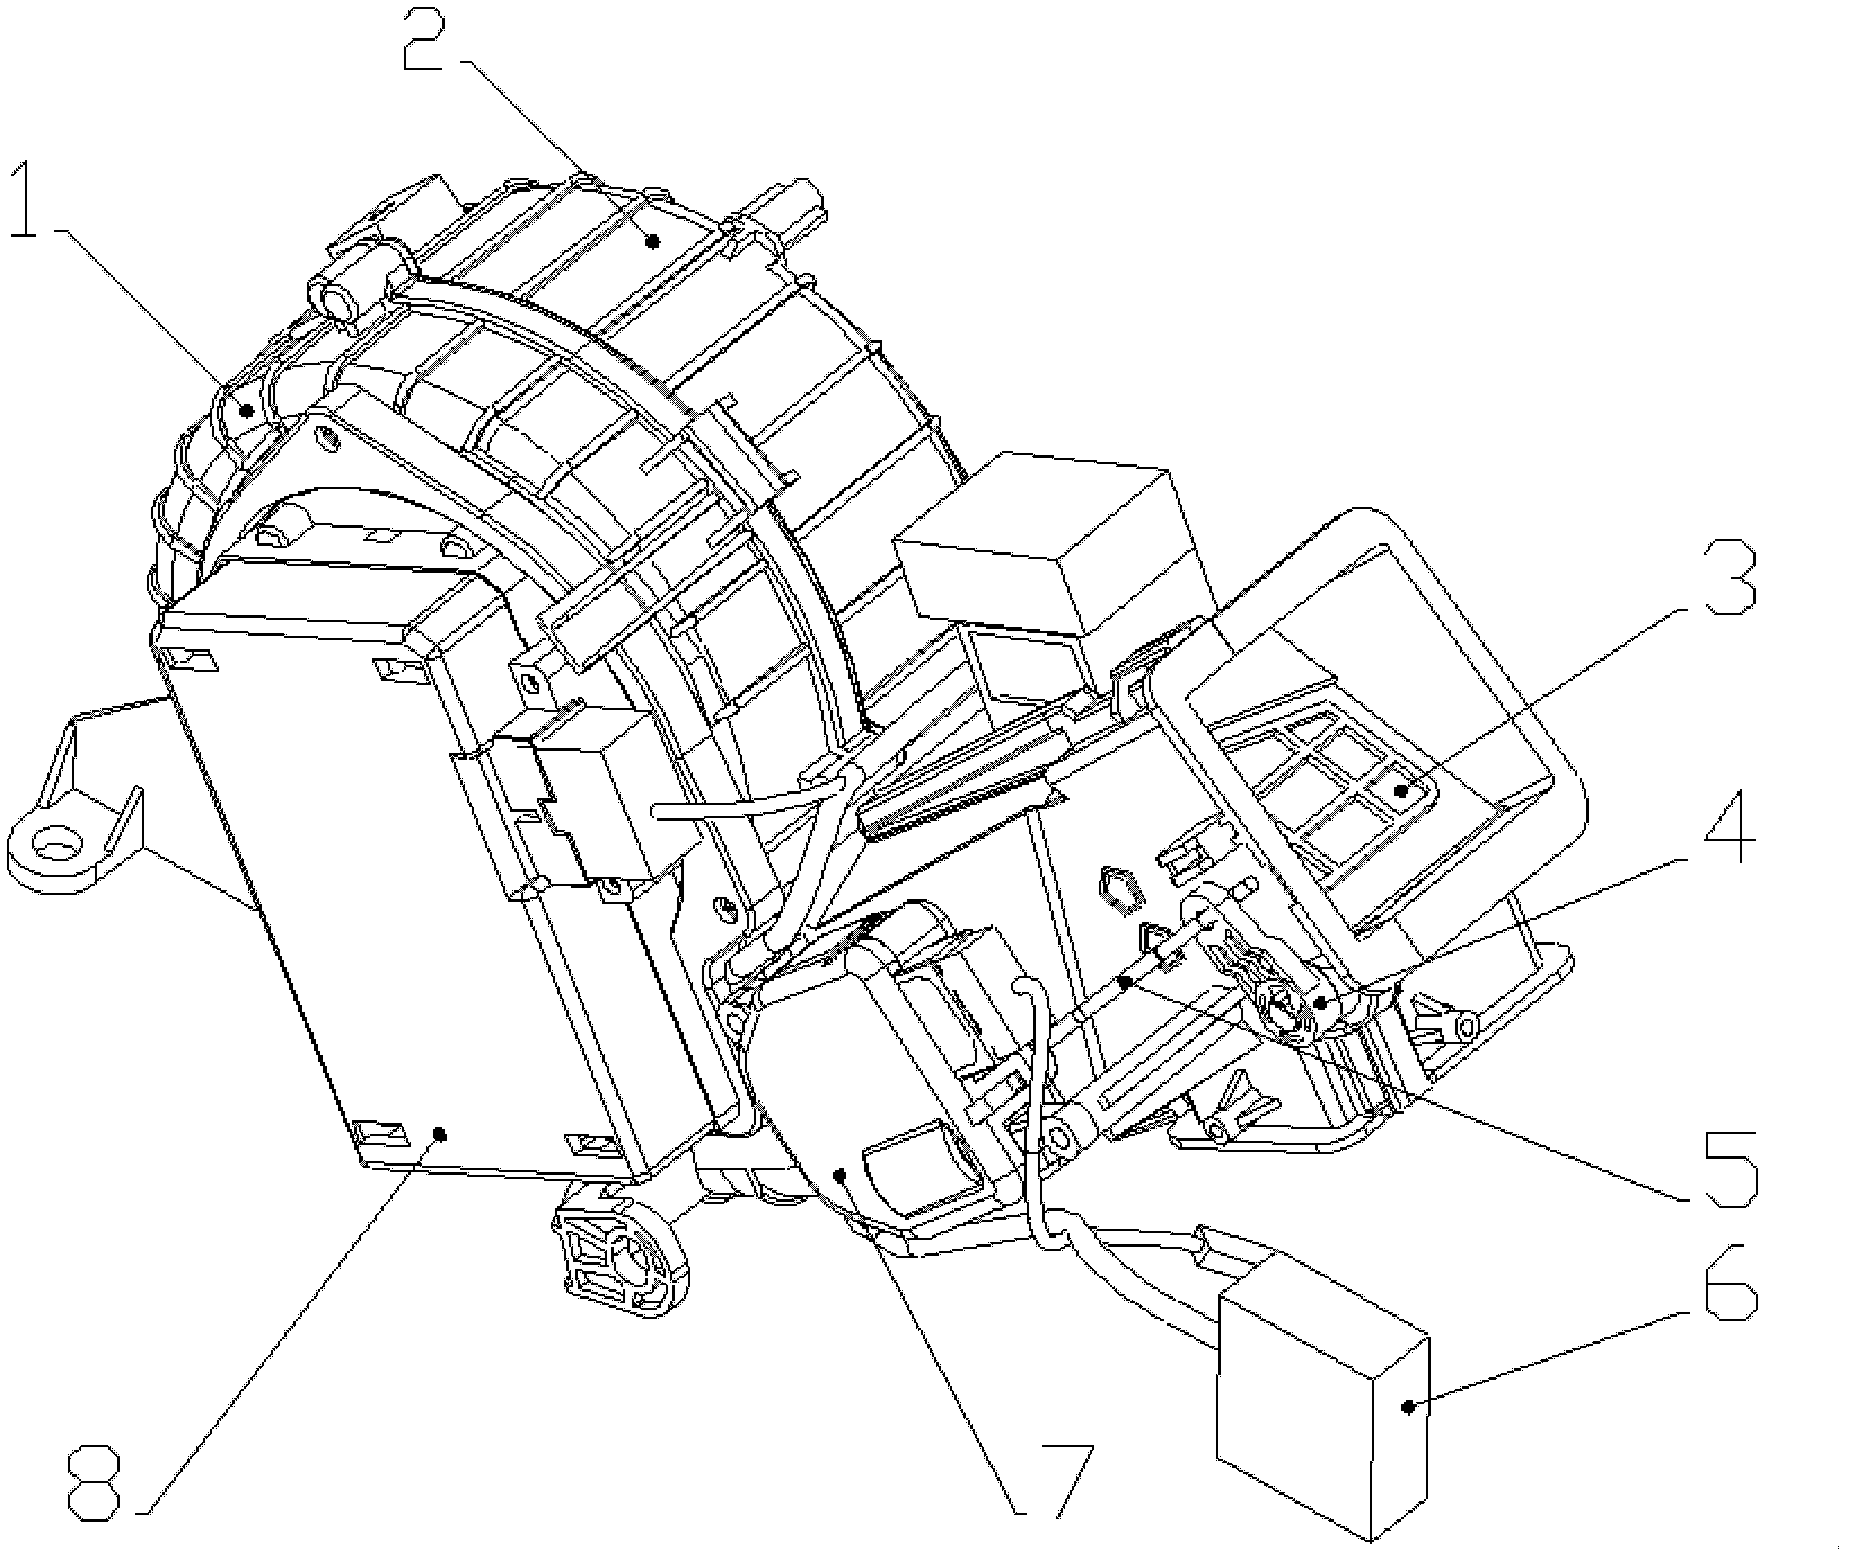 Back row air blowing mechanism for vehicle air conditioner